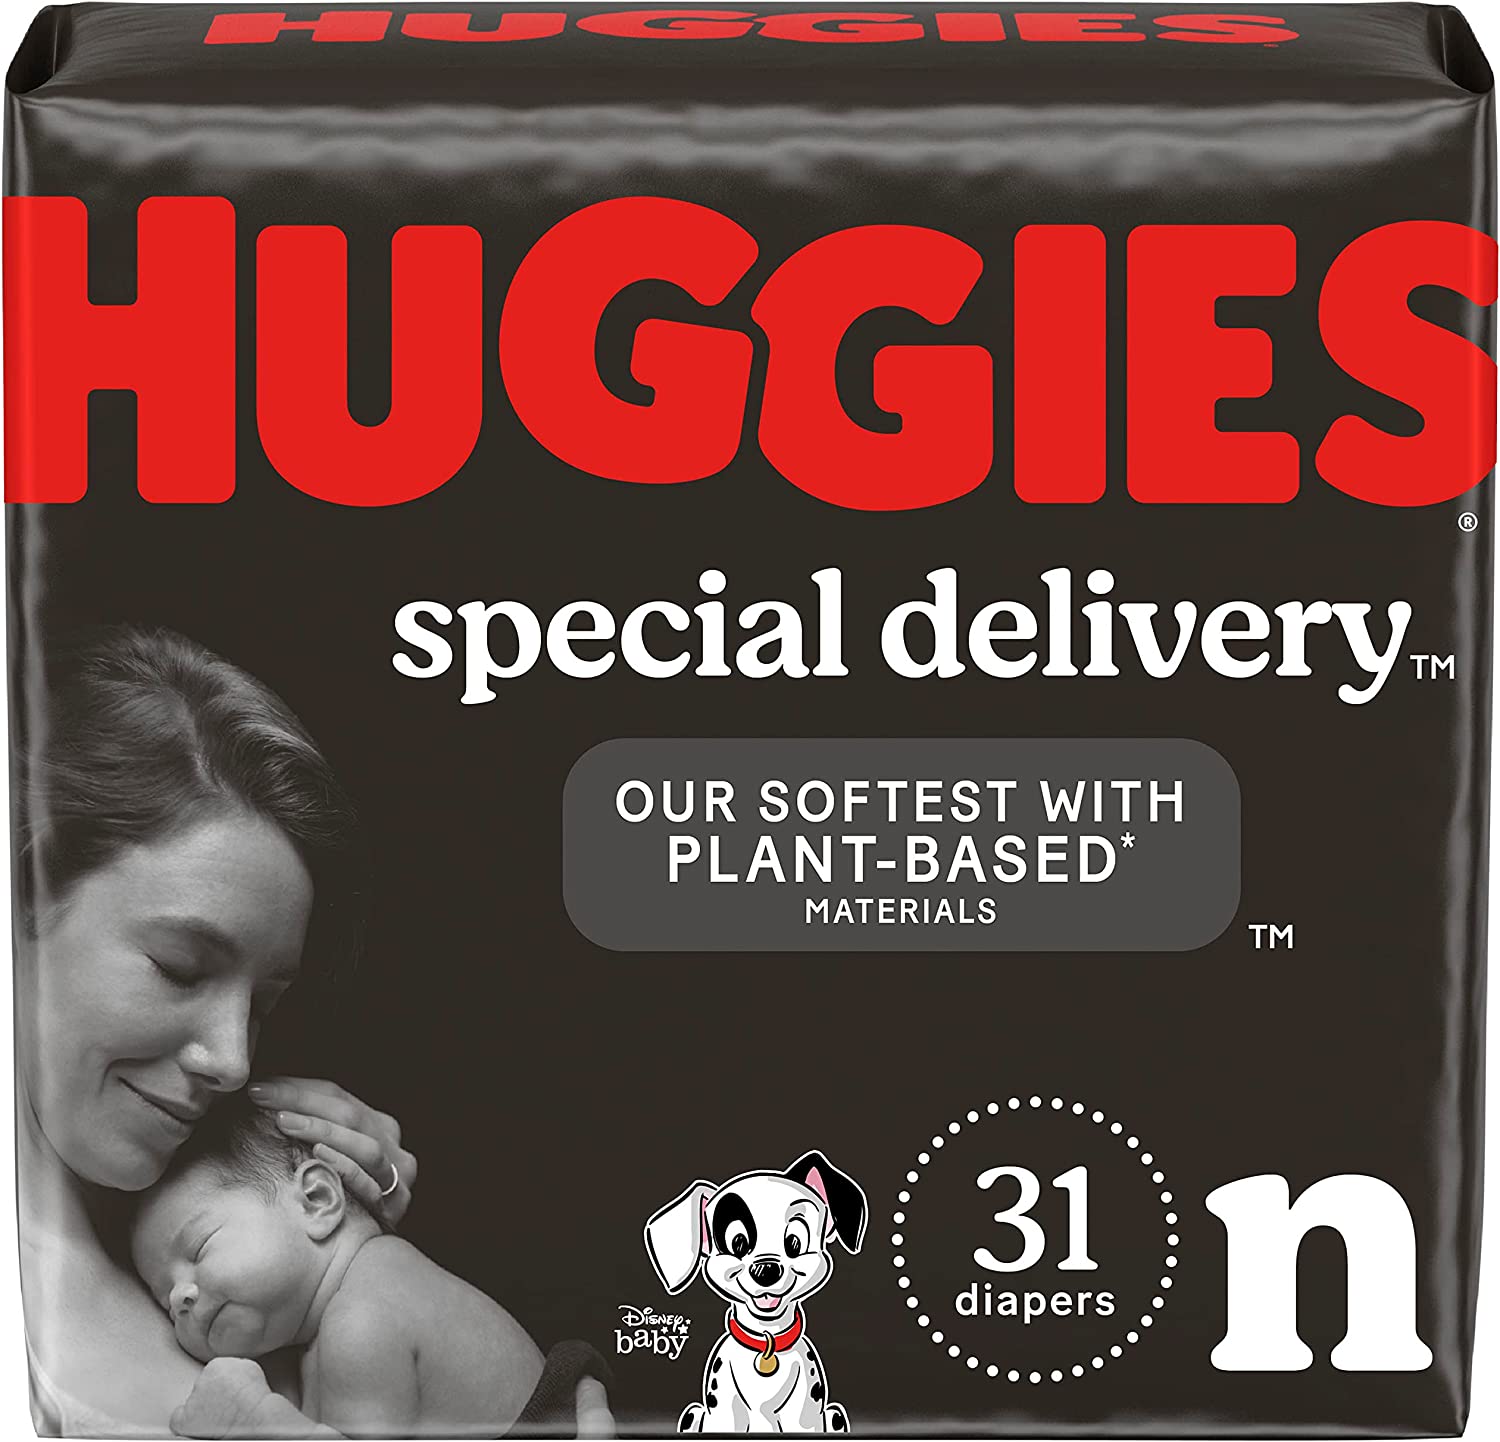 Hypoallergenic Baby Diapers Size Newborn (up to 10 lbs), Huggies Special Delivery, Fragrance Free, Safe for Sensitive Skin, 31 Ct